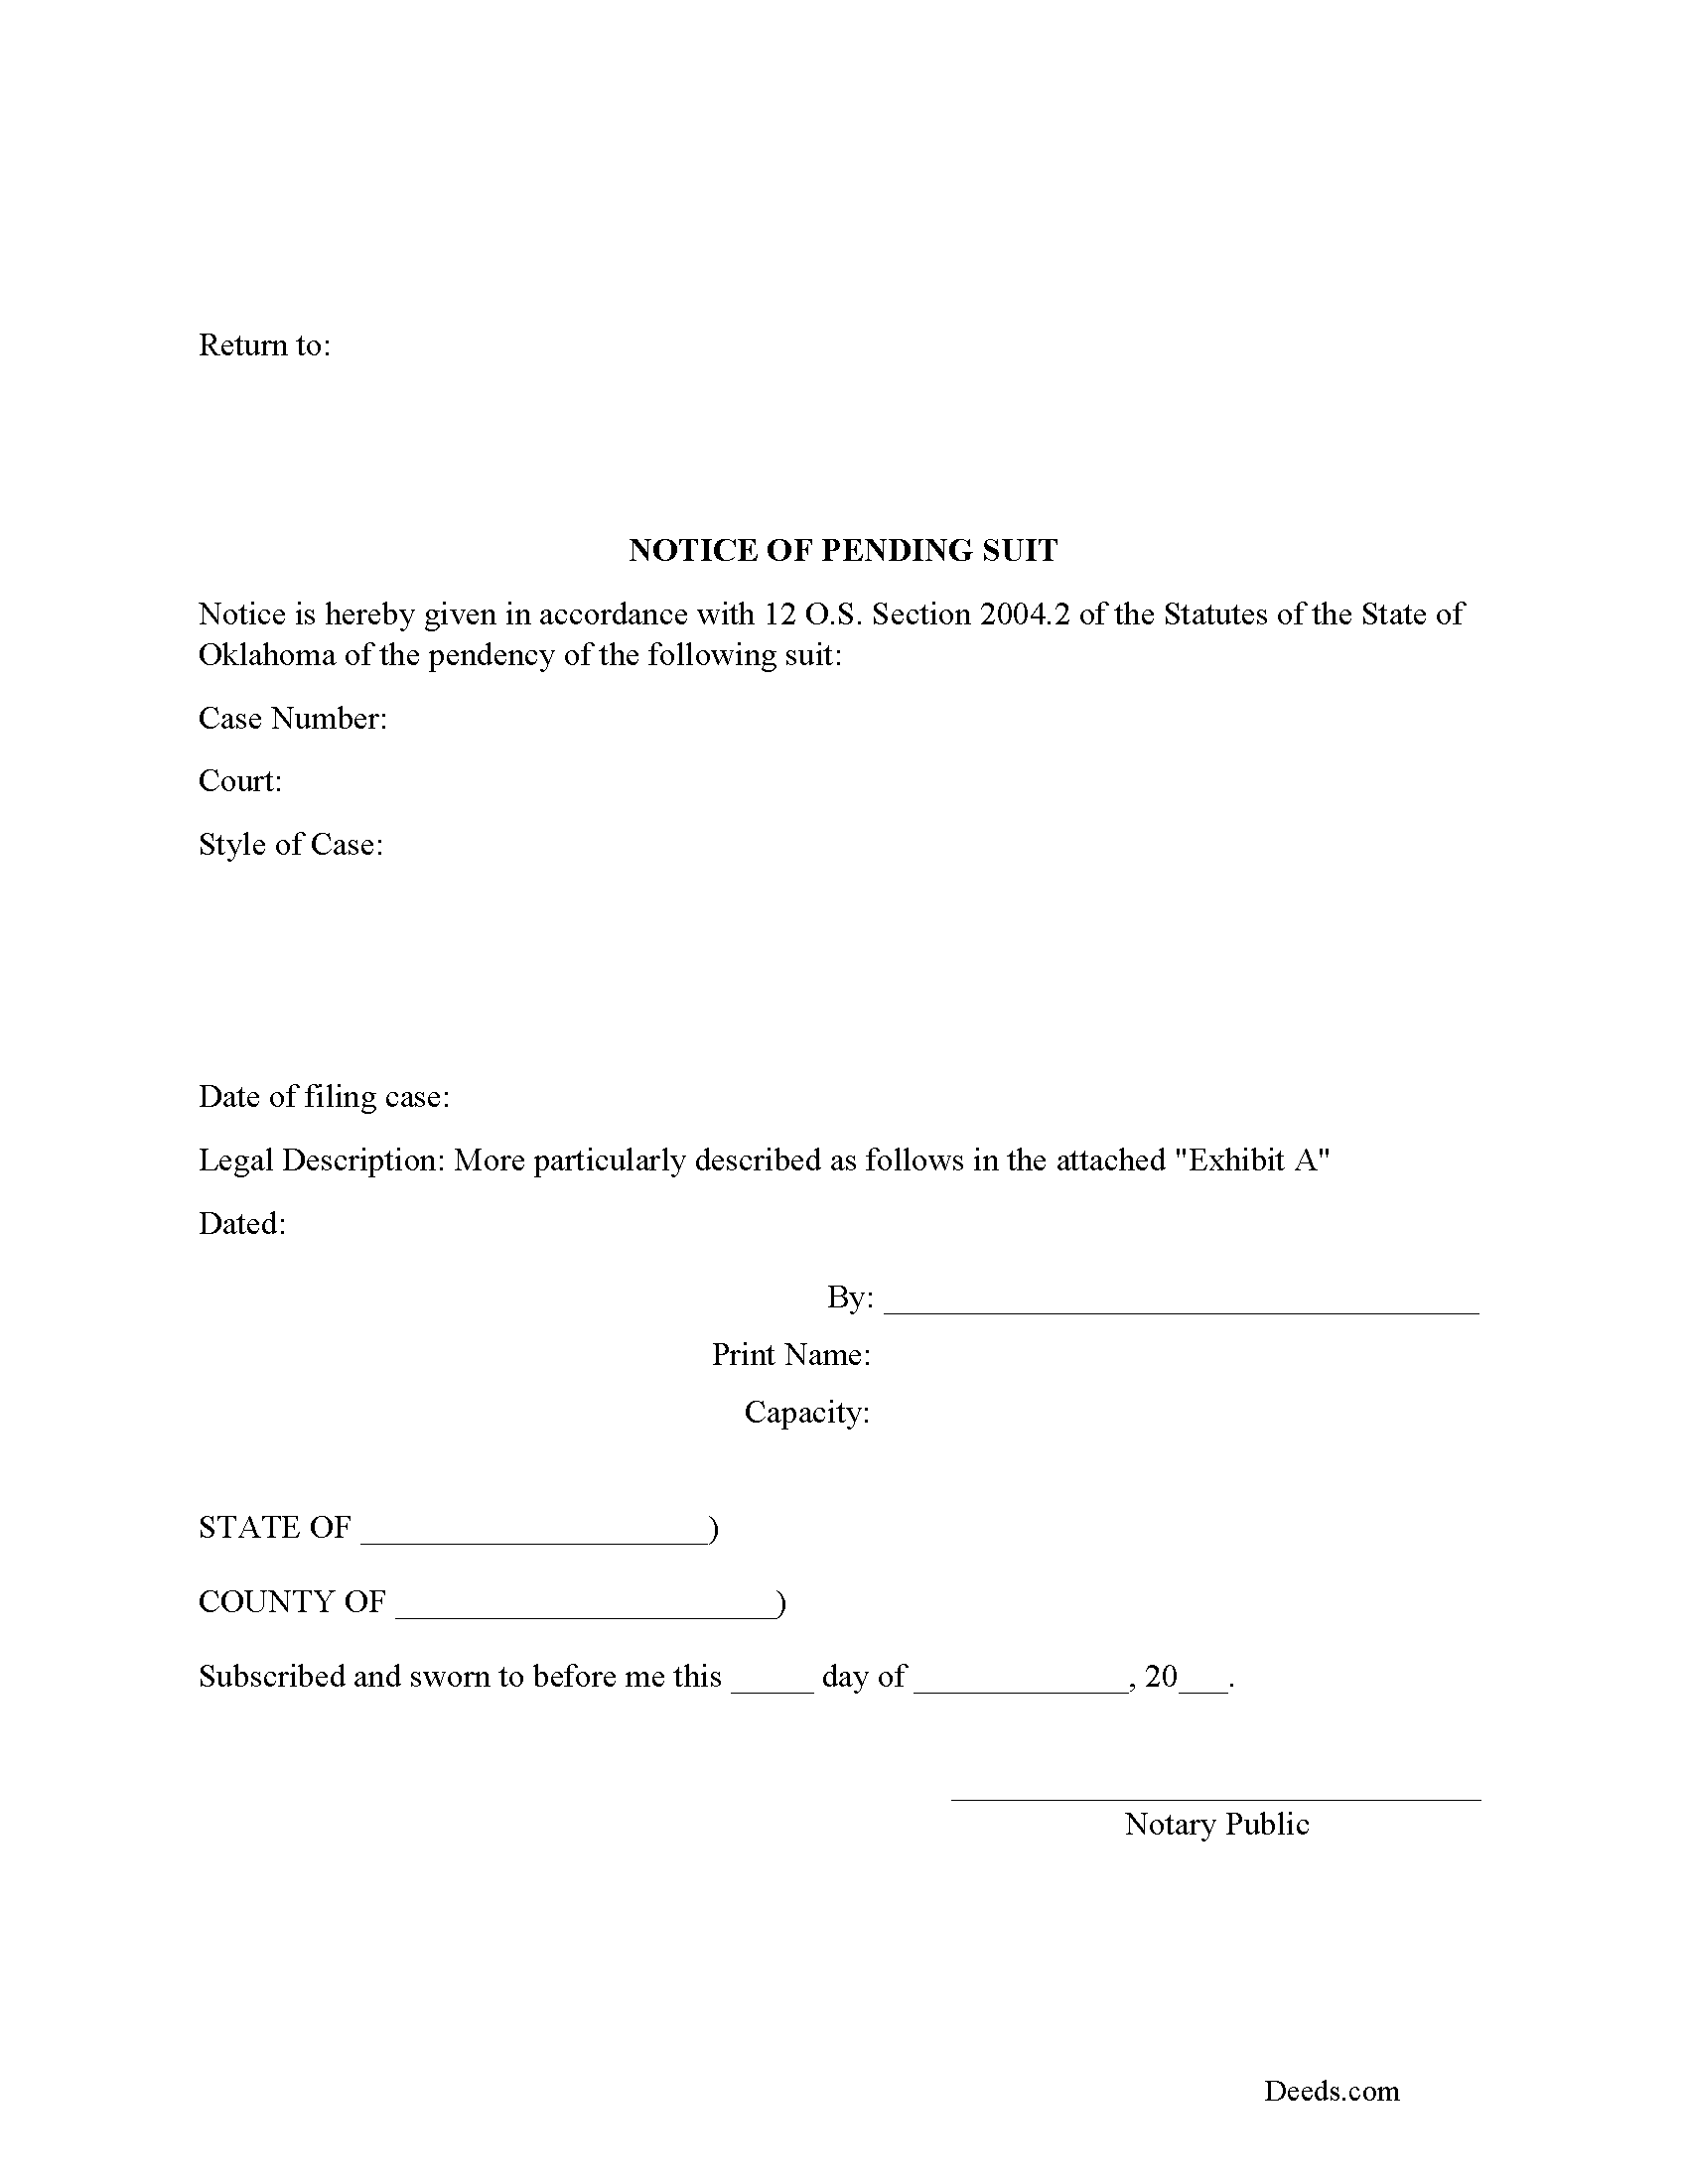 Oklahoma Lis Pendens - Notice of Pending Suit Image